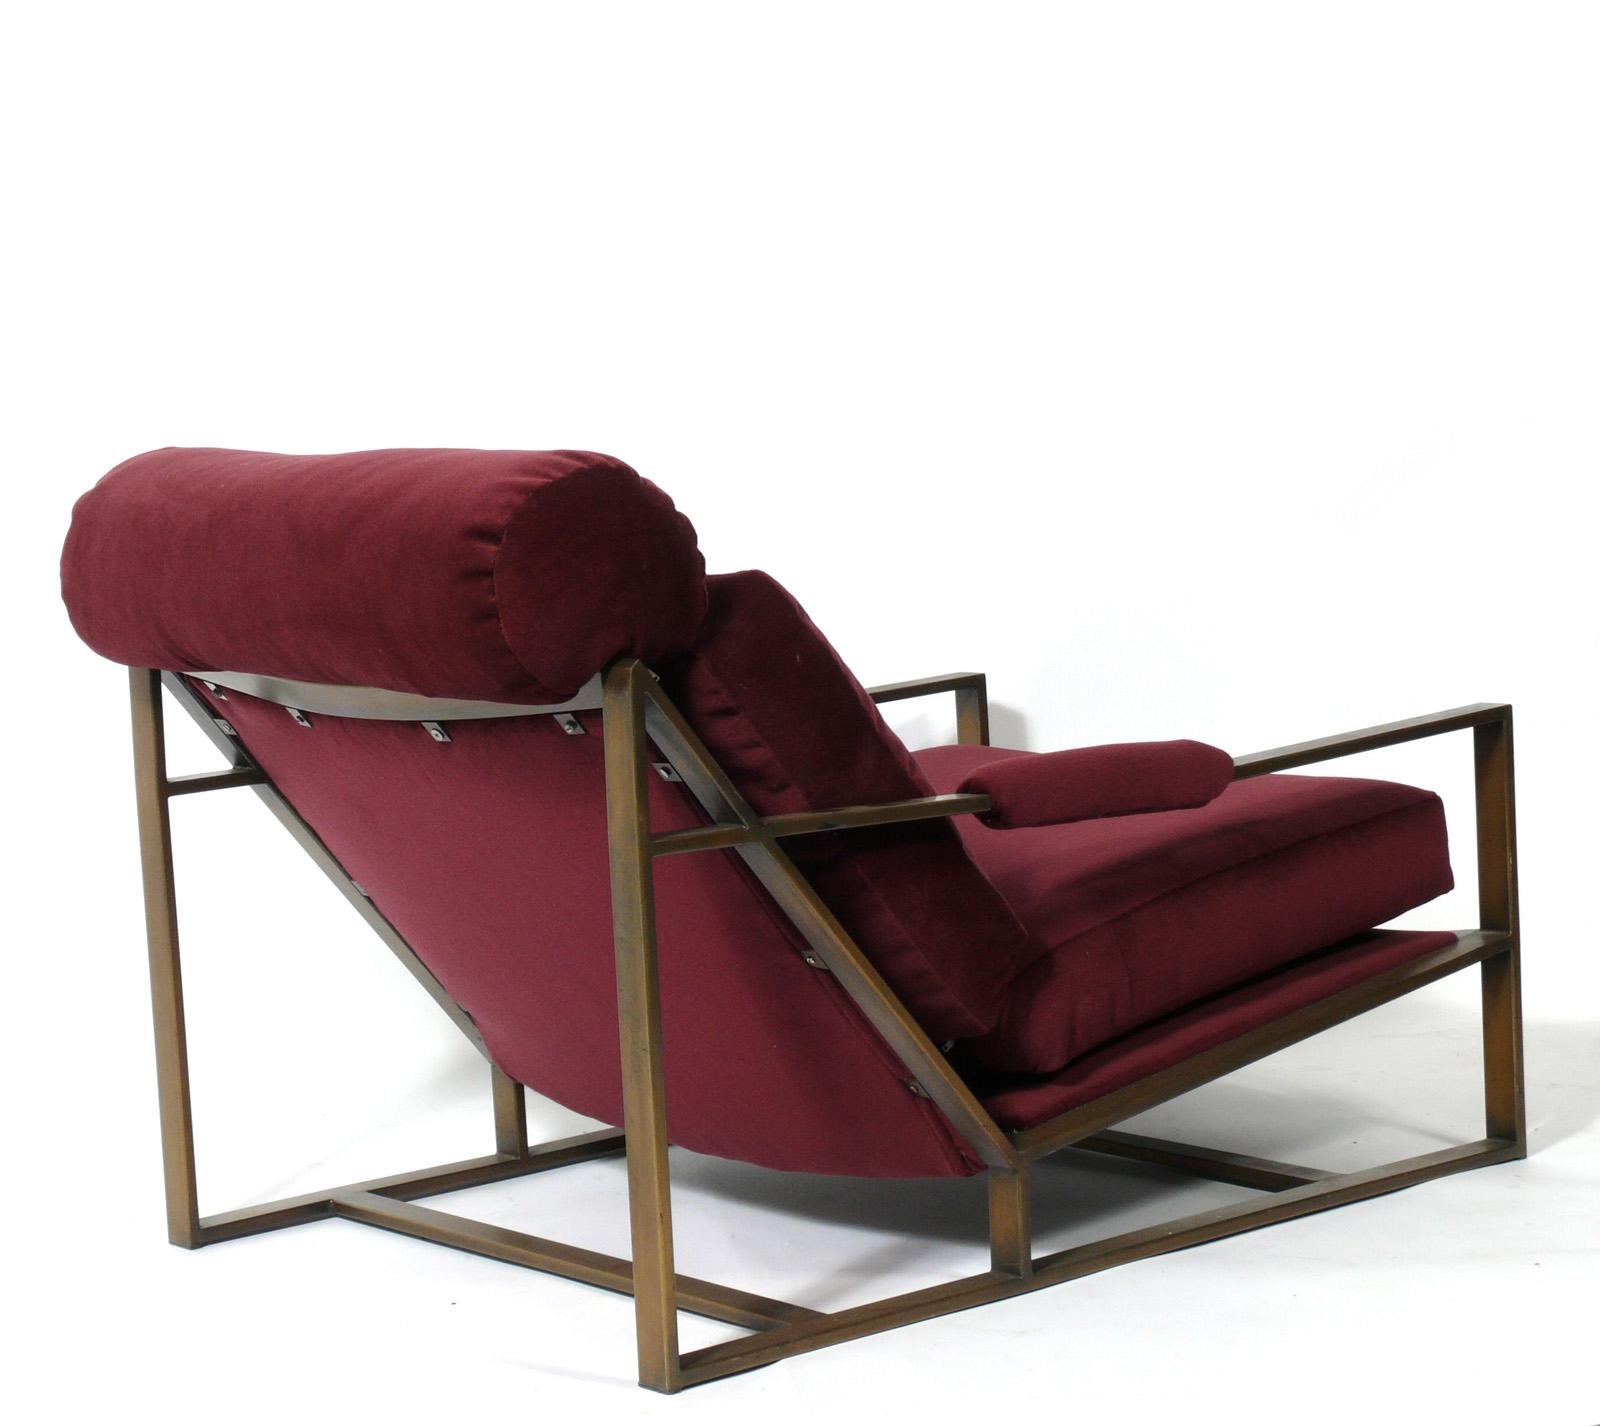 Low Slung lounge chair in bronze finish, designed by Milo Baughman for Thayer Coggin, American, circa 1960s. Retains it's original cabernet color velvety upholstery. The bronze finished metal frame retains it's warm original patina.